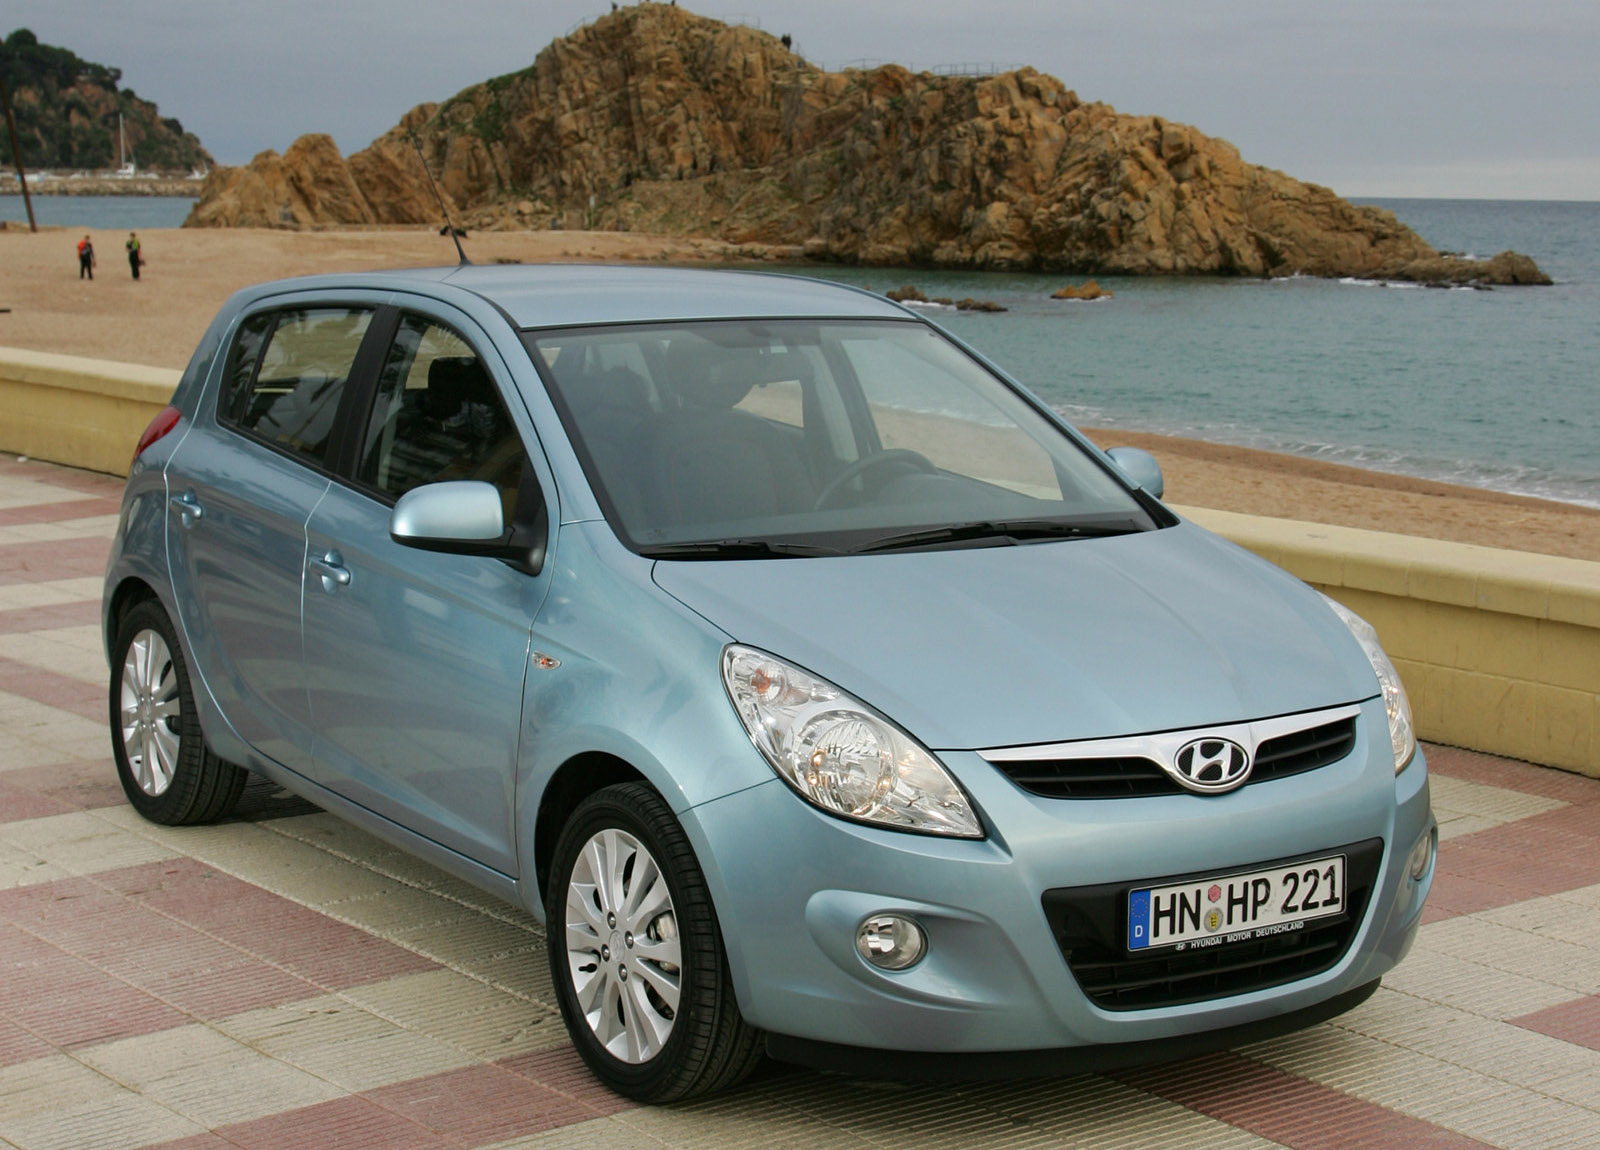 2009 Hyundai i20 HD Pictures